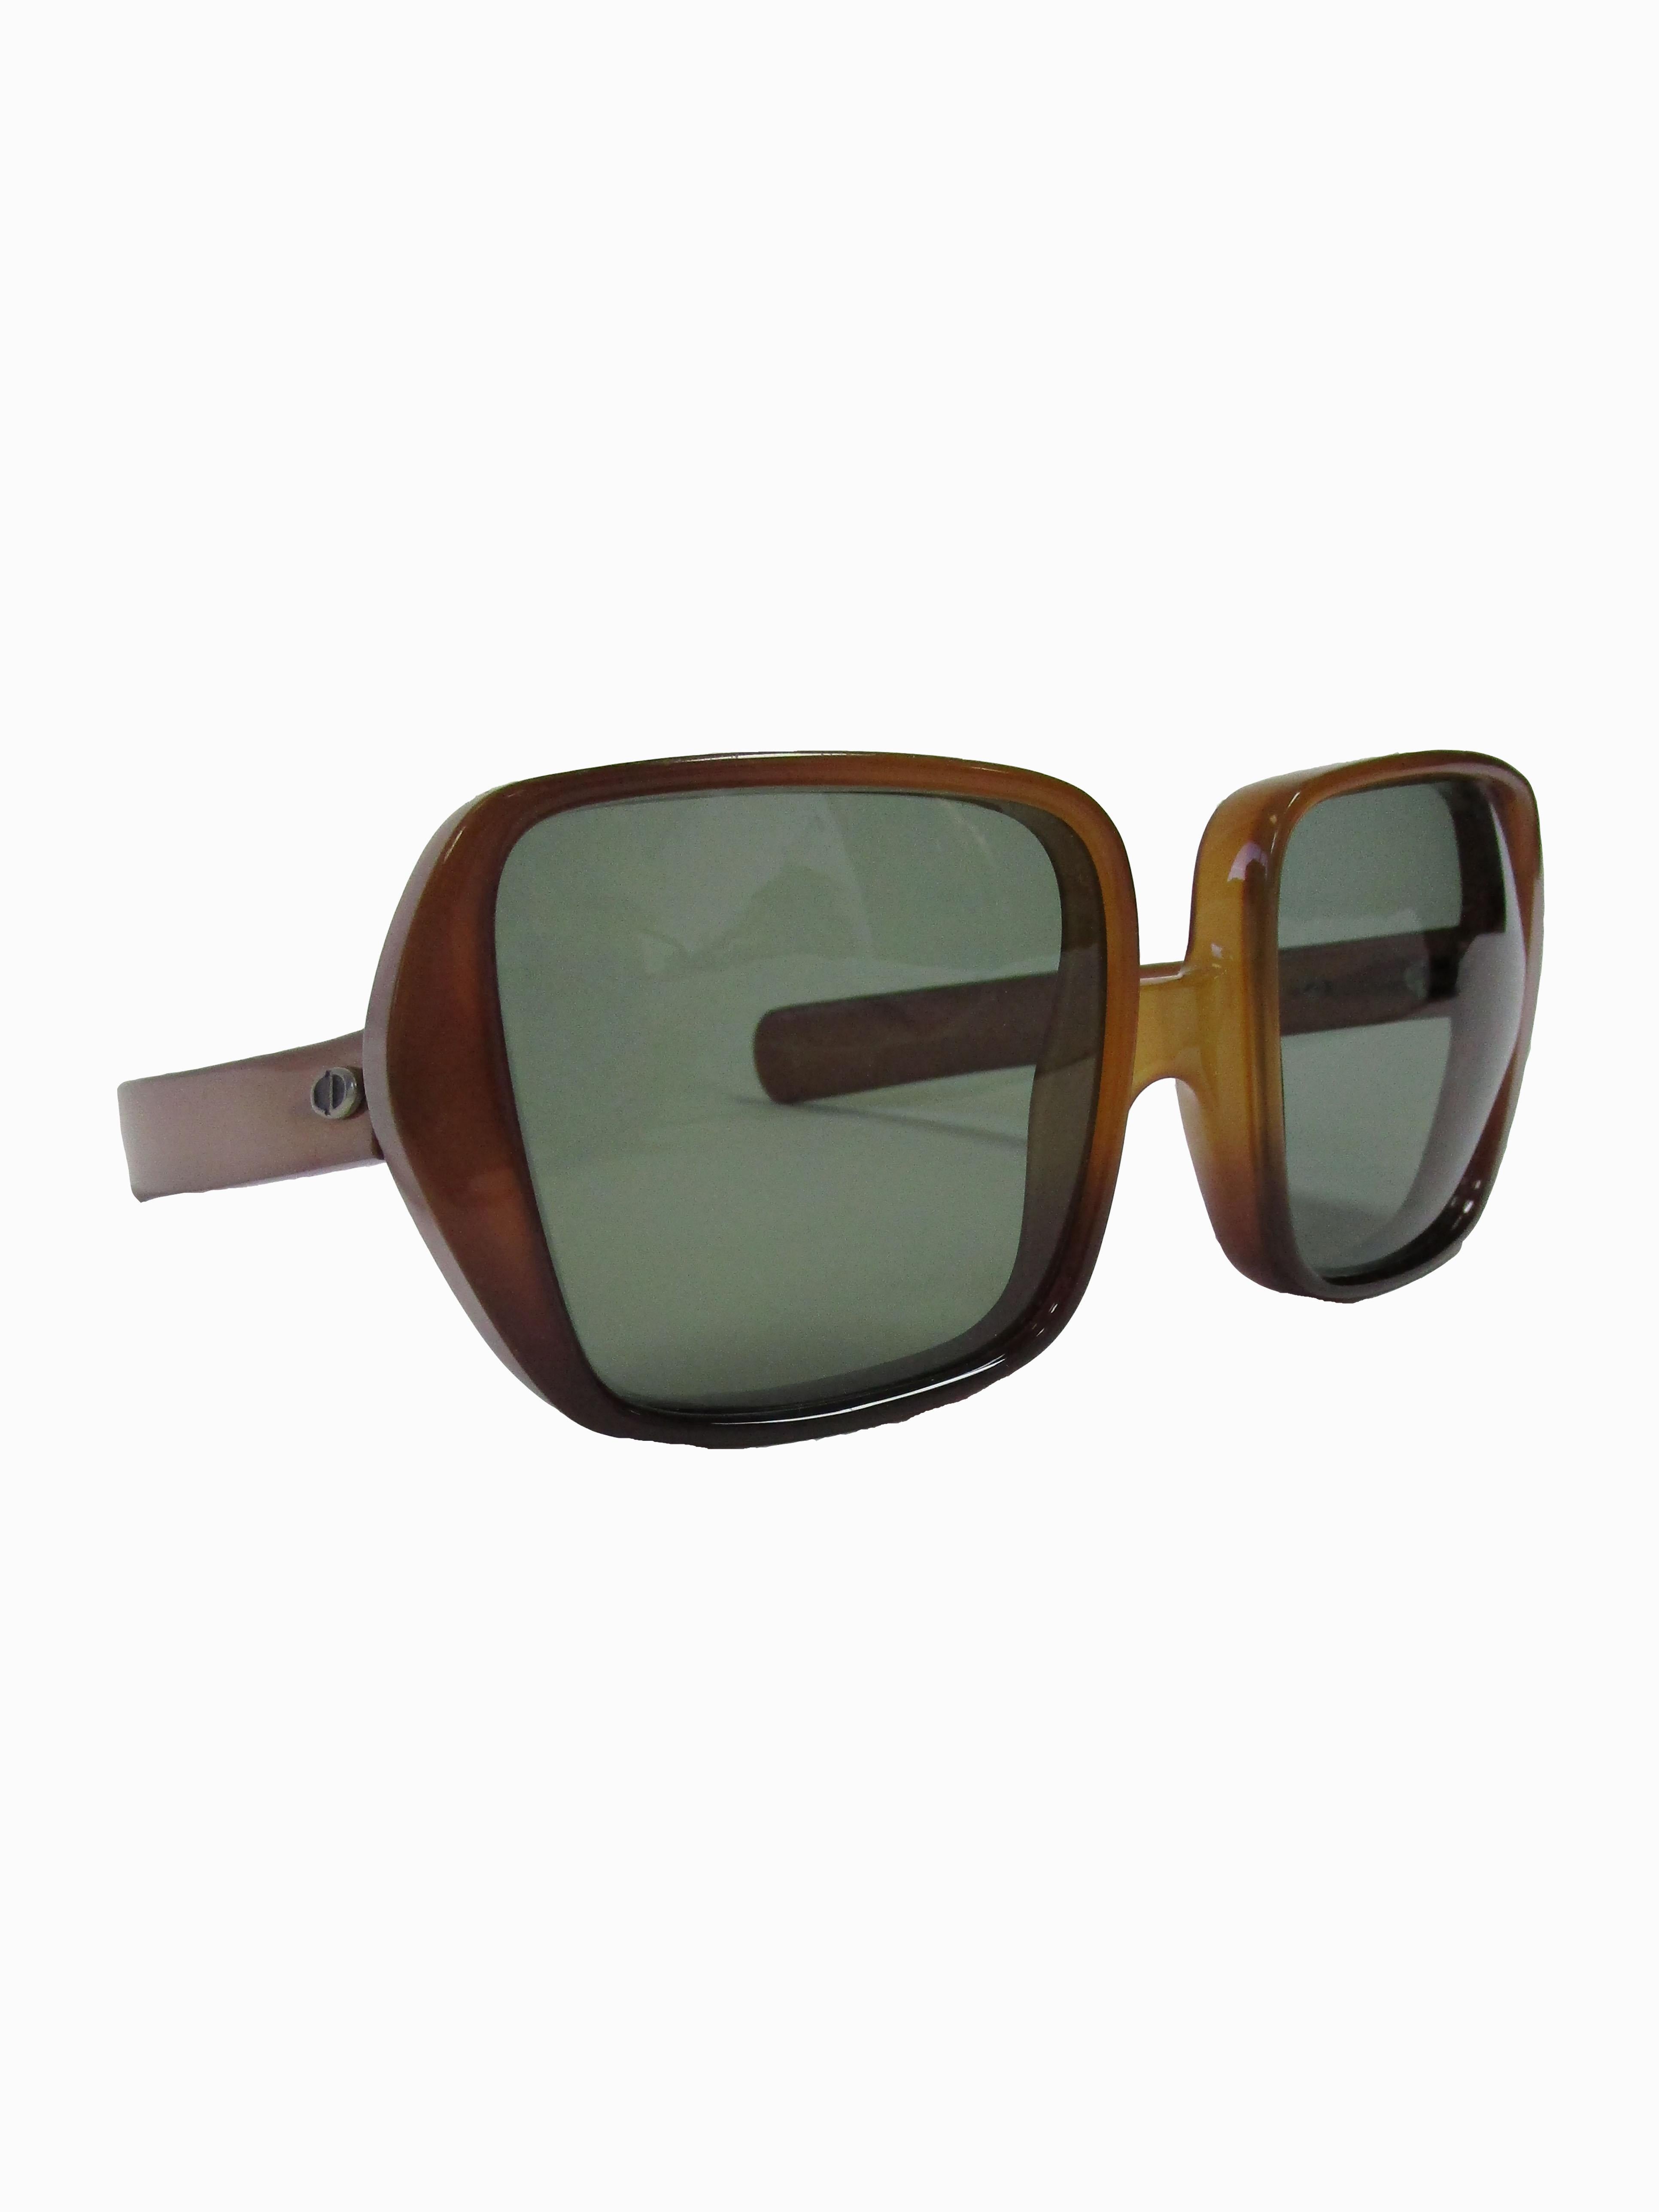 
Fantastic Christian Dior Sunglasses that feature a brutalist style framing with translucent brown optyl acetate and tinted green lenses. Christian Dior was the first designer brand to use optyl, before most sunglasses were made of acetate. Optyl is